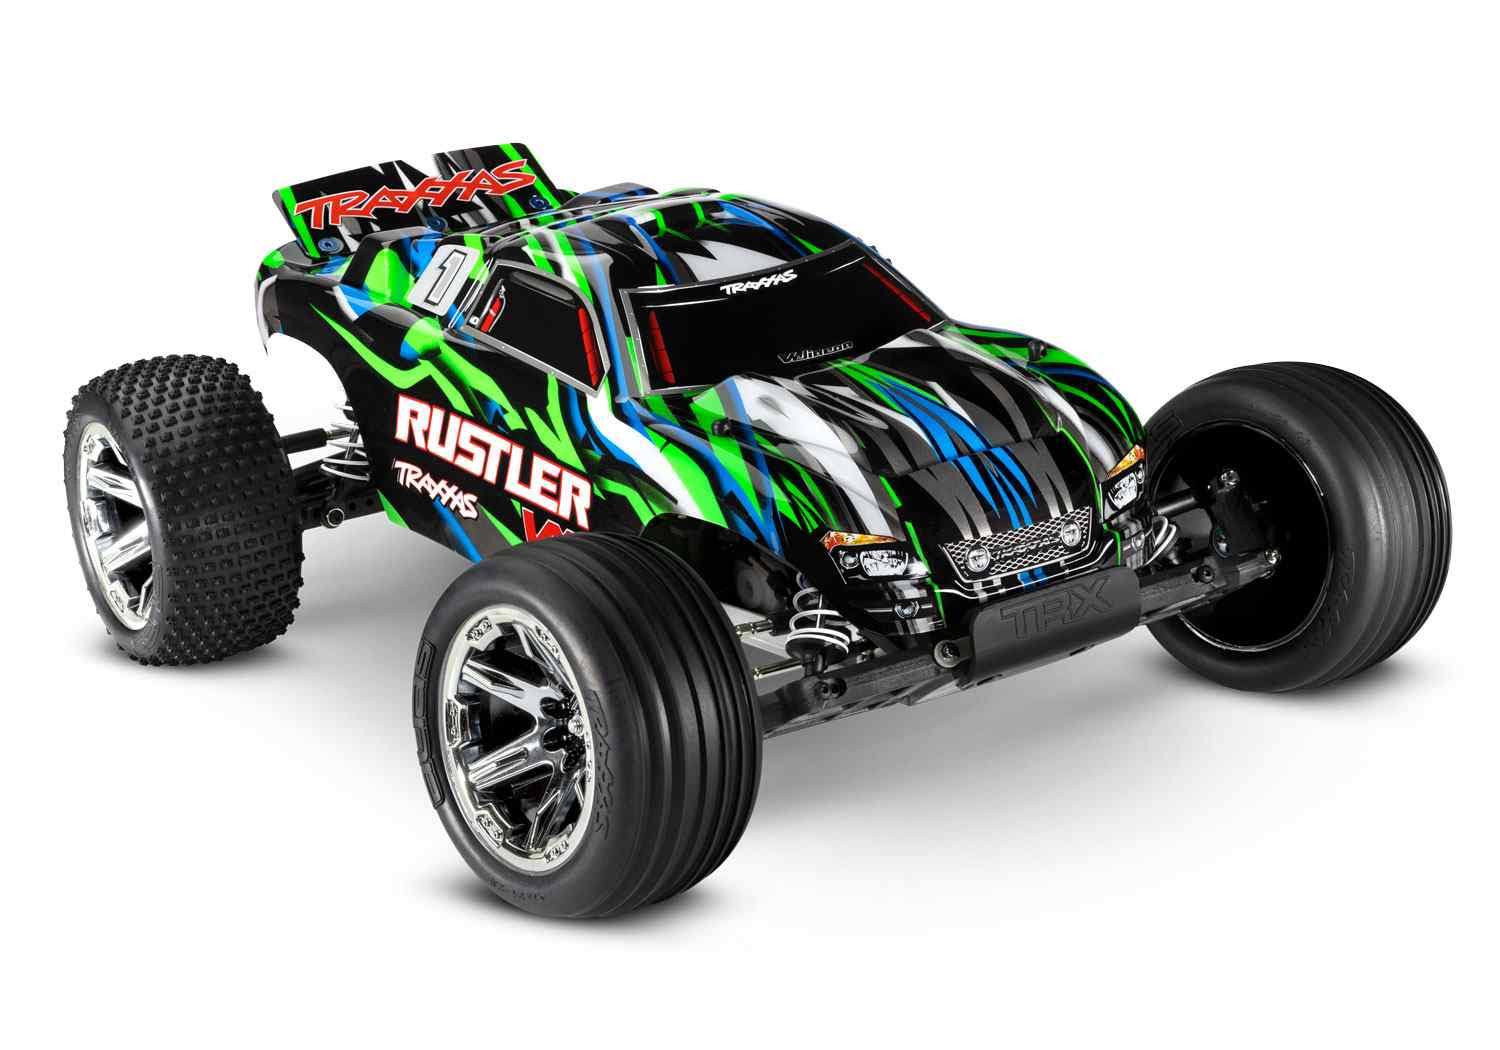 TRAXXAS TRA 37076-74-GRN Rustler VXL: 1/10 Scale Stadium Truck. Ready-to-Race with TQi Traxxas Link Enabled 2.4GHz Radio System, Velineon VXL-3s